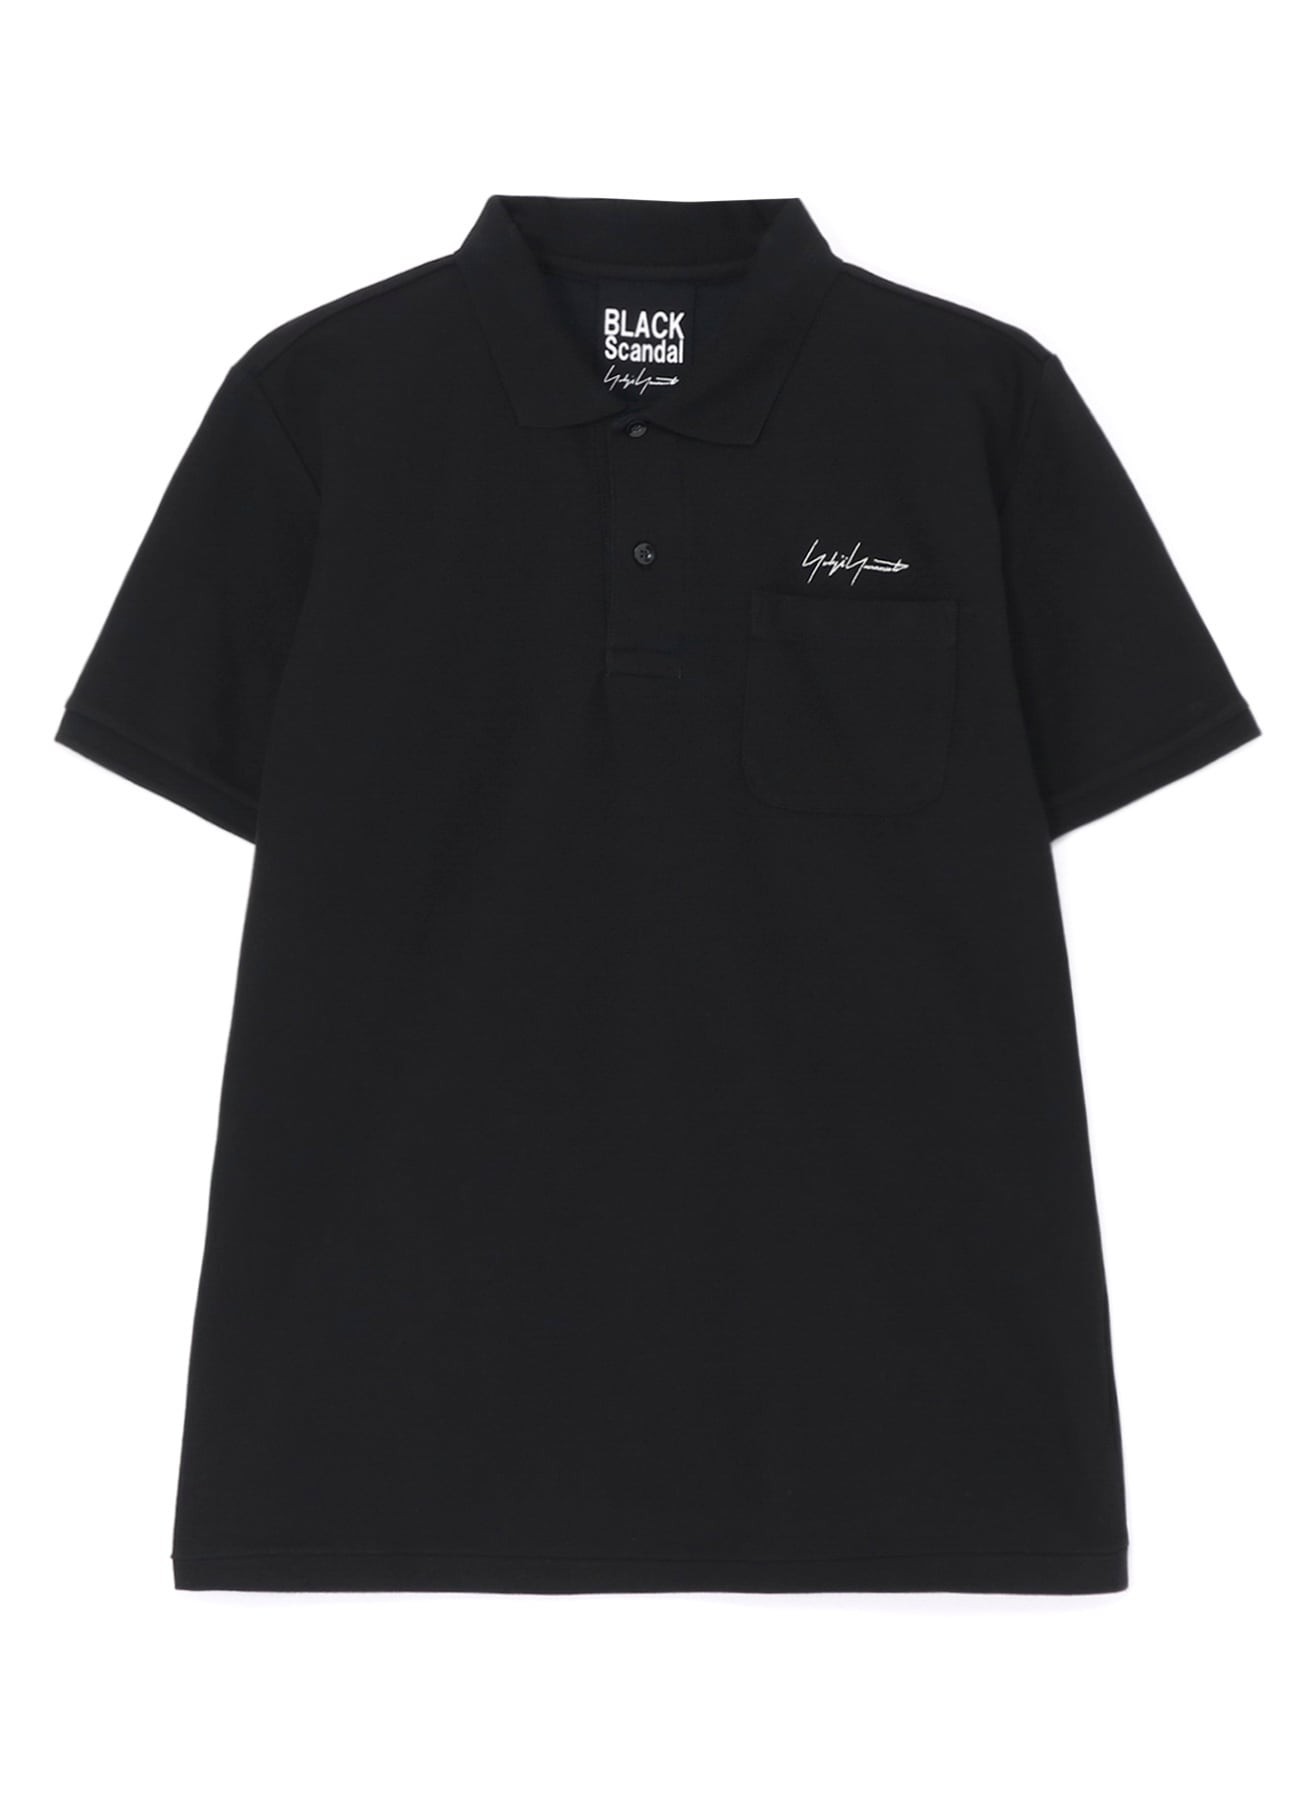 2PIECES PACK SIGNATURE EMBROIDERY POLO SHIRTS (XS Black): Vintage 